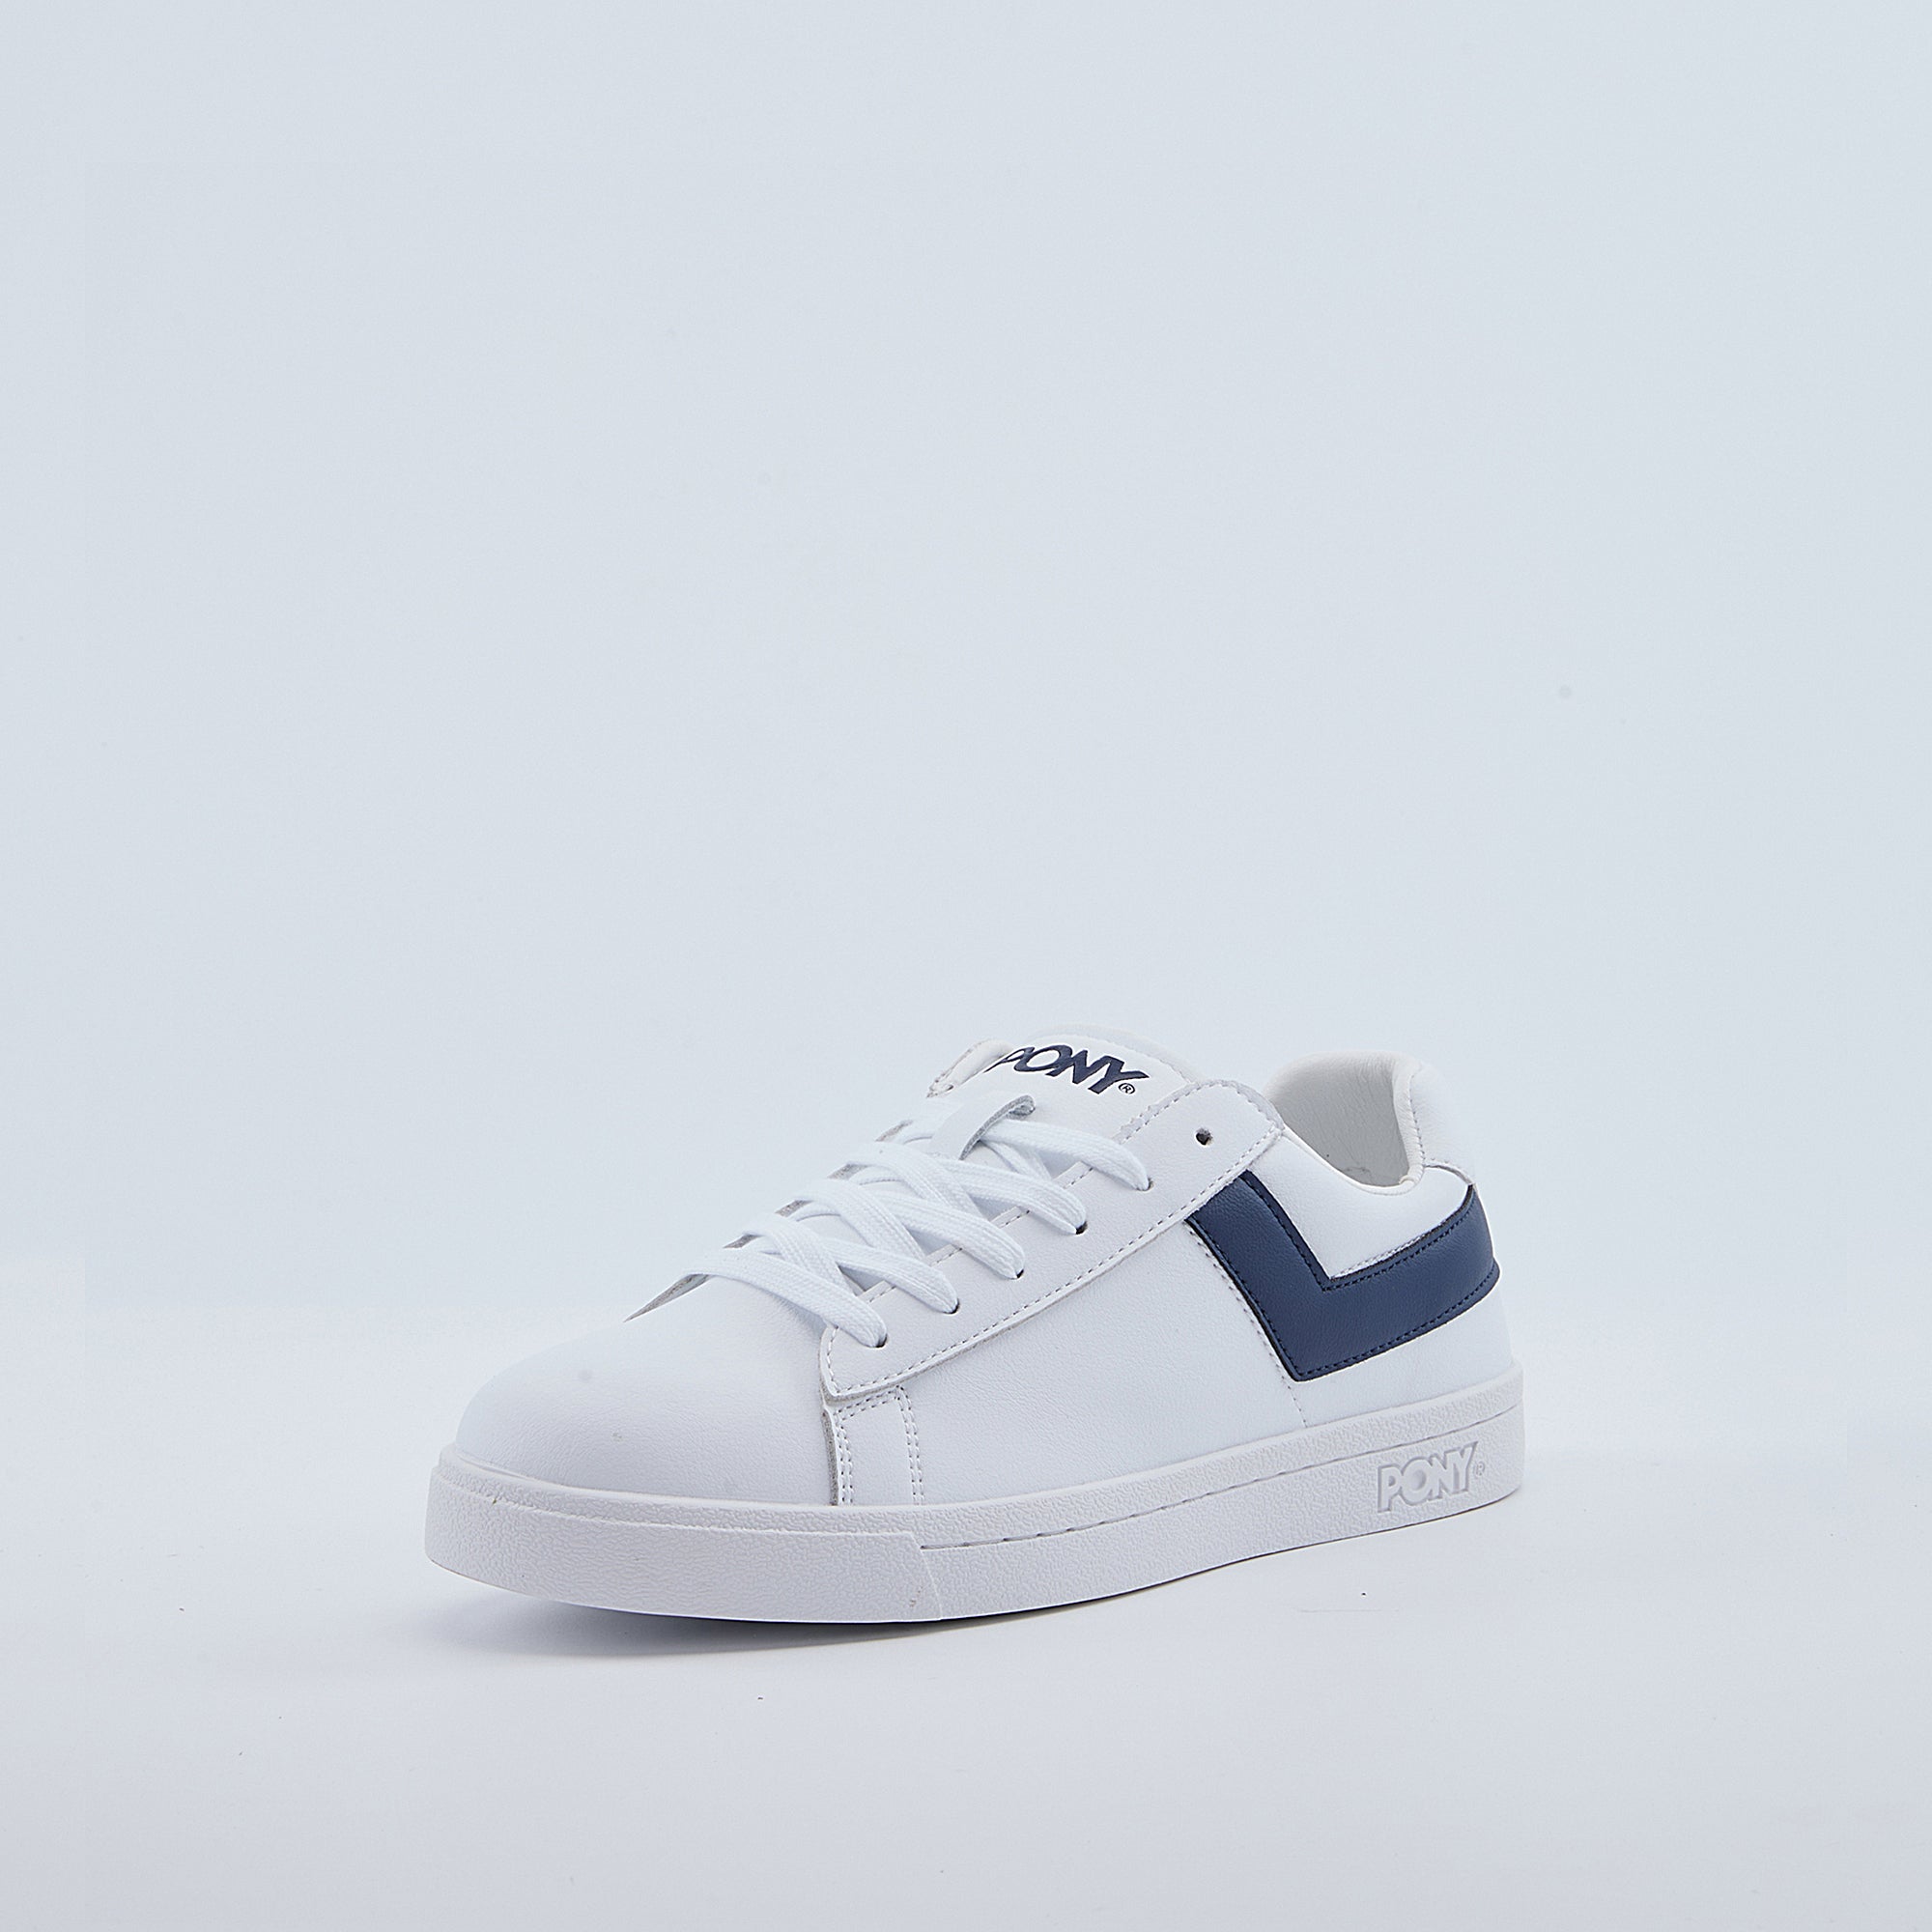 Pony Men's Top Star Sneakers with White Main Lace/Ext Lace Navy as Chevron Marine